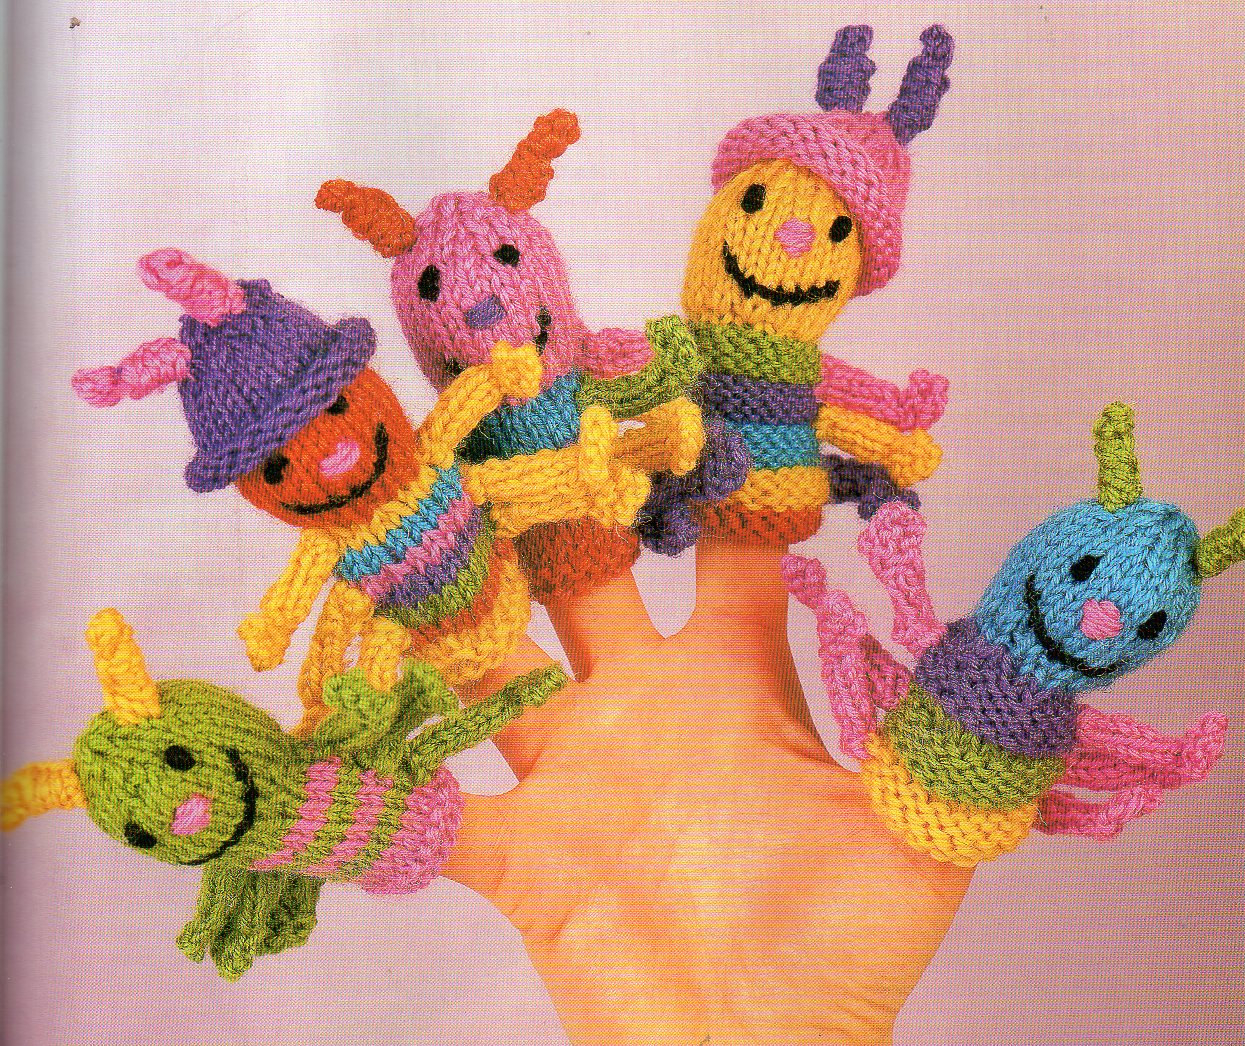 Knitting Patterns For Finger Puppets 5 Caterpillar Finger Puppets Knitting Pattern Ba Child Toddler Toy Finger Puppets Knitting Pattern Pdf Instant Download